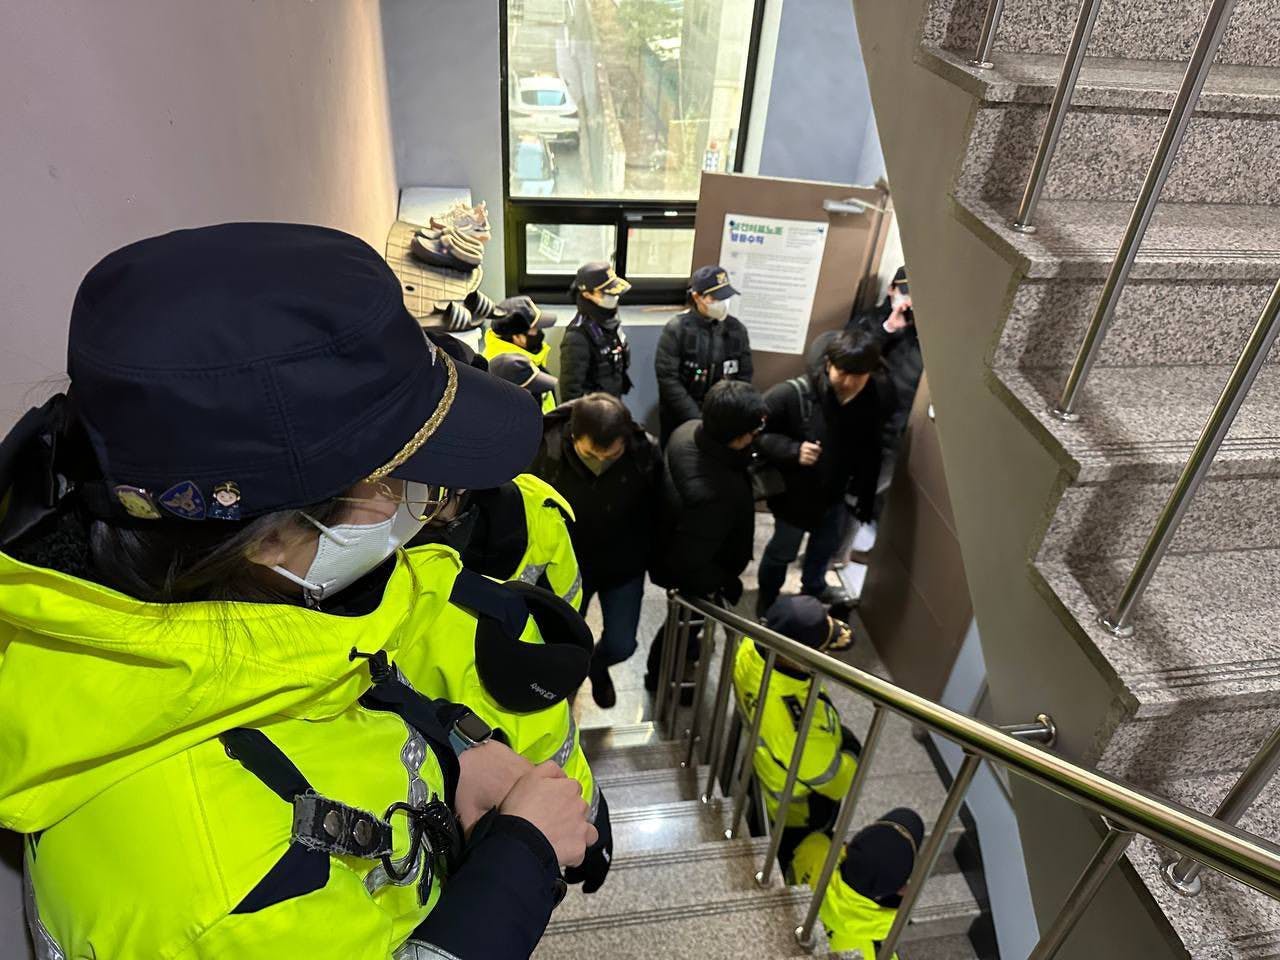 Security forces in South Korea raided nearly a dozen union offices